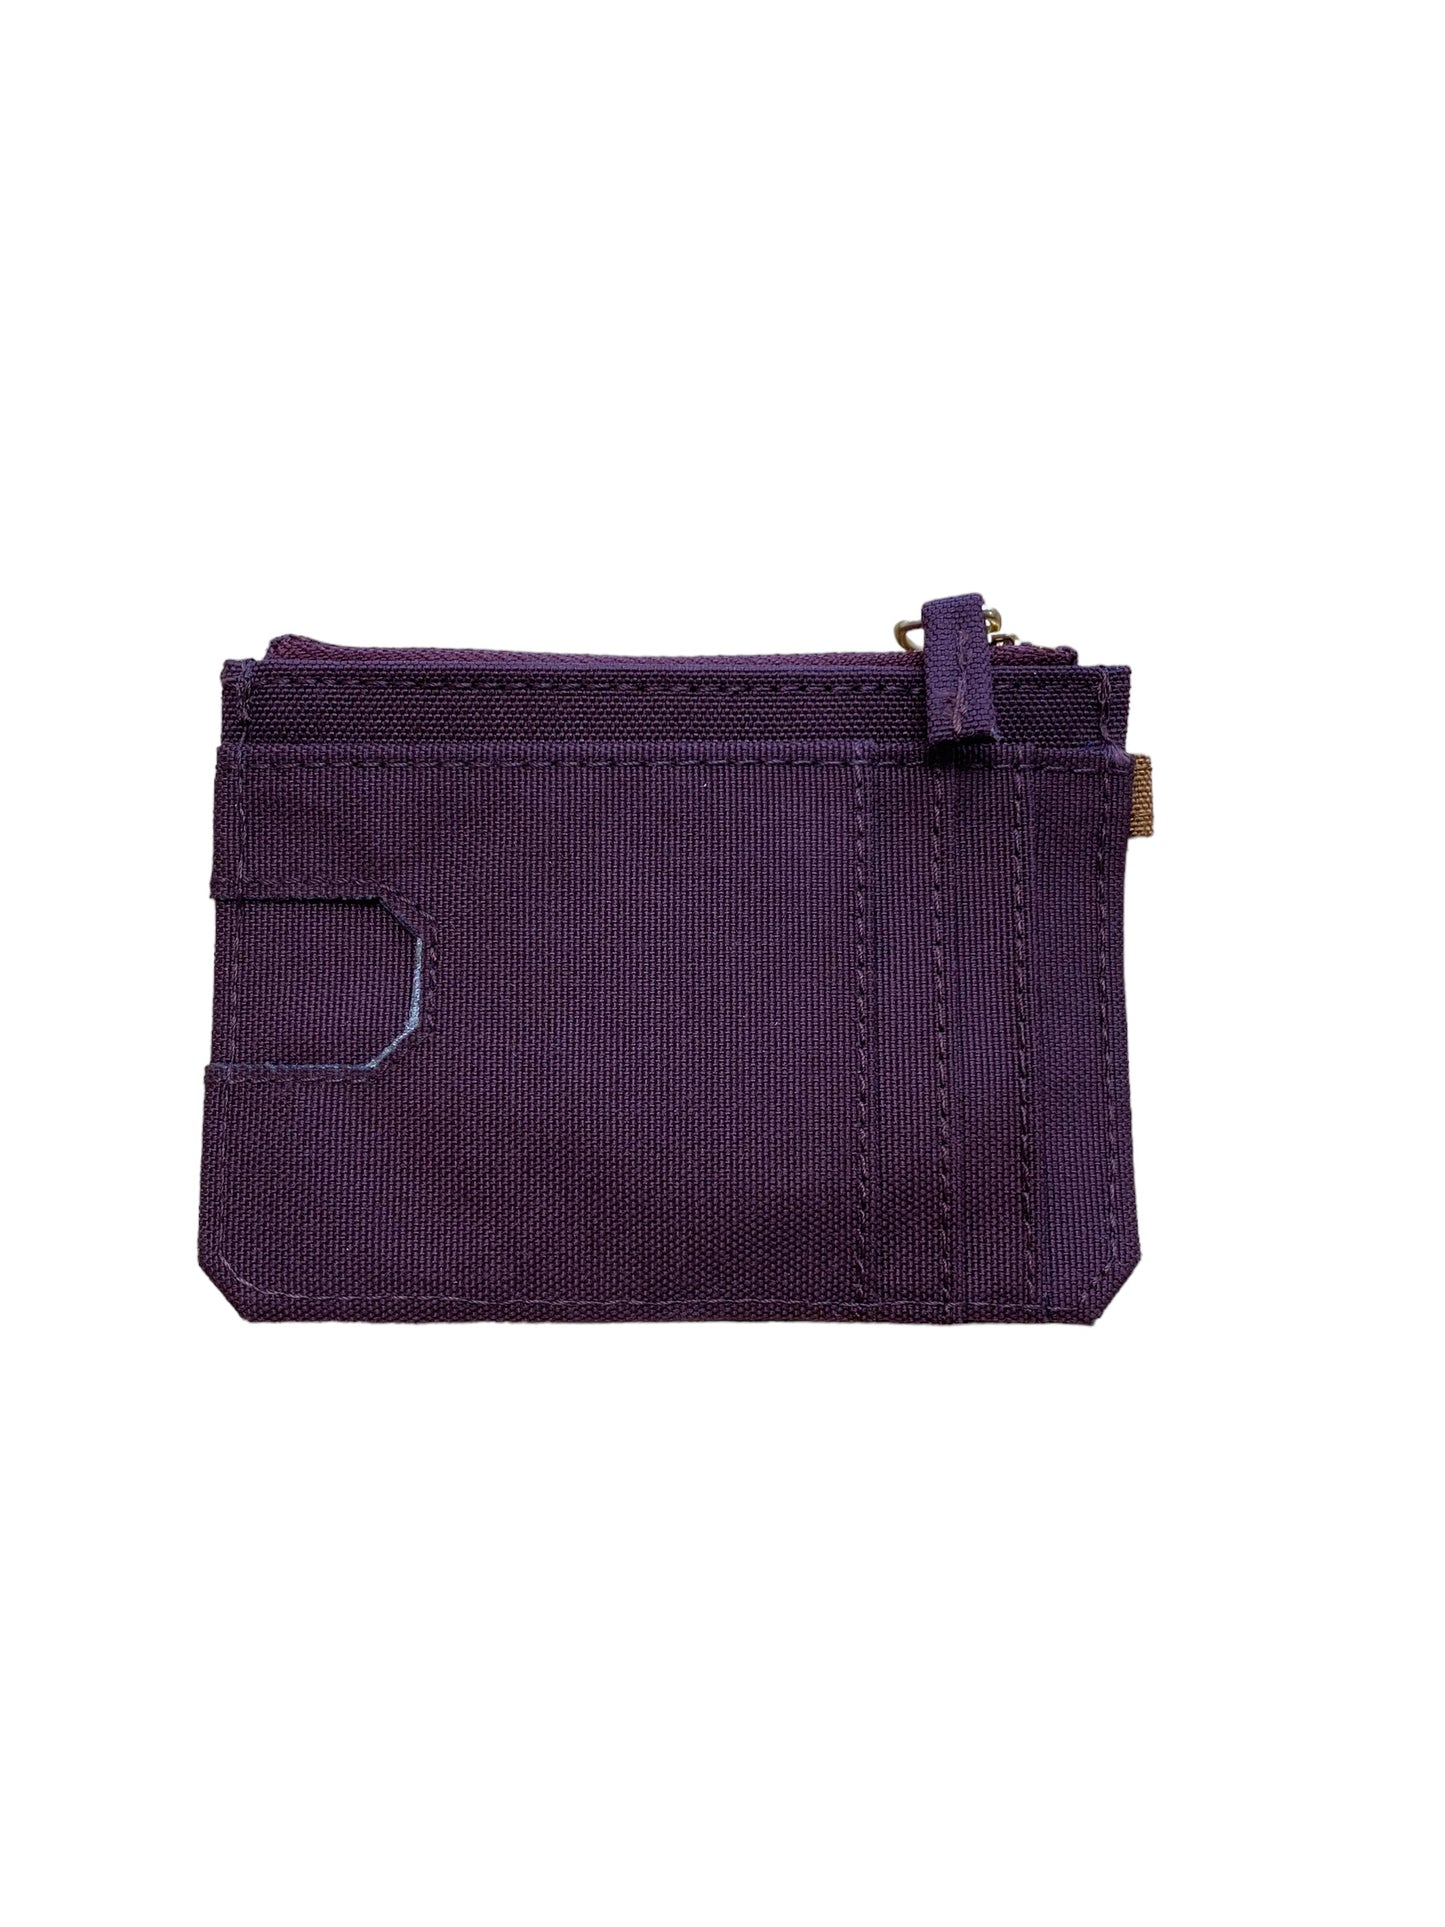 Wallet By Carhartt  Size: Small